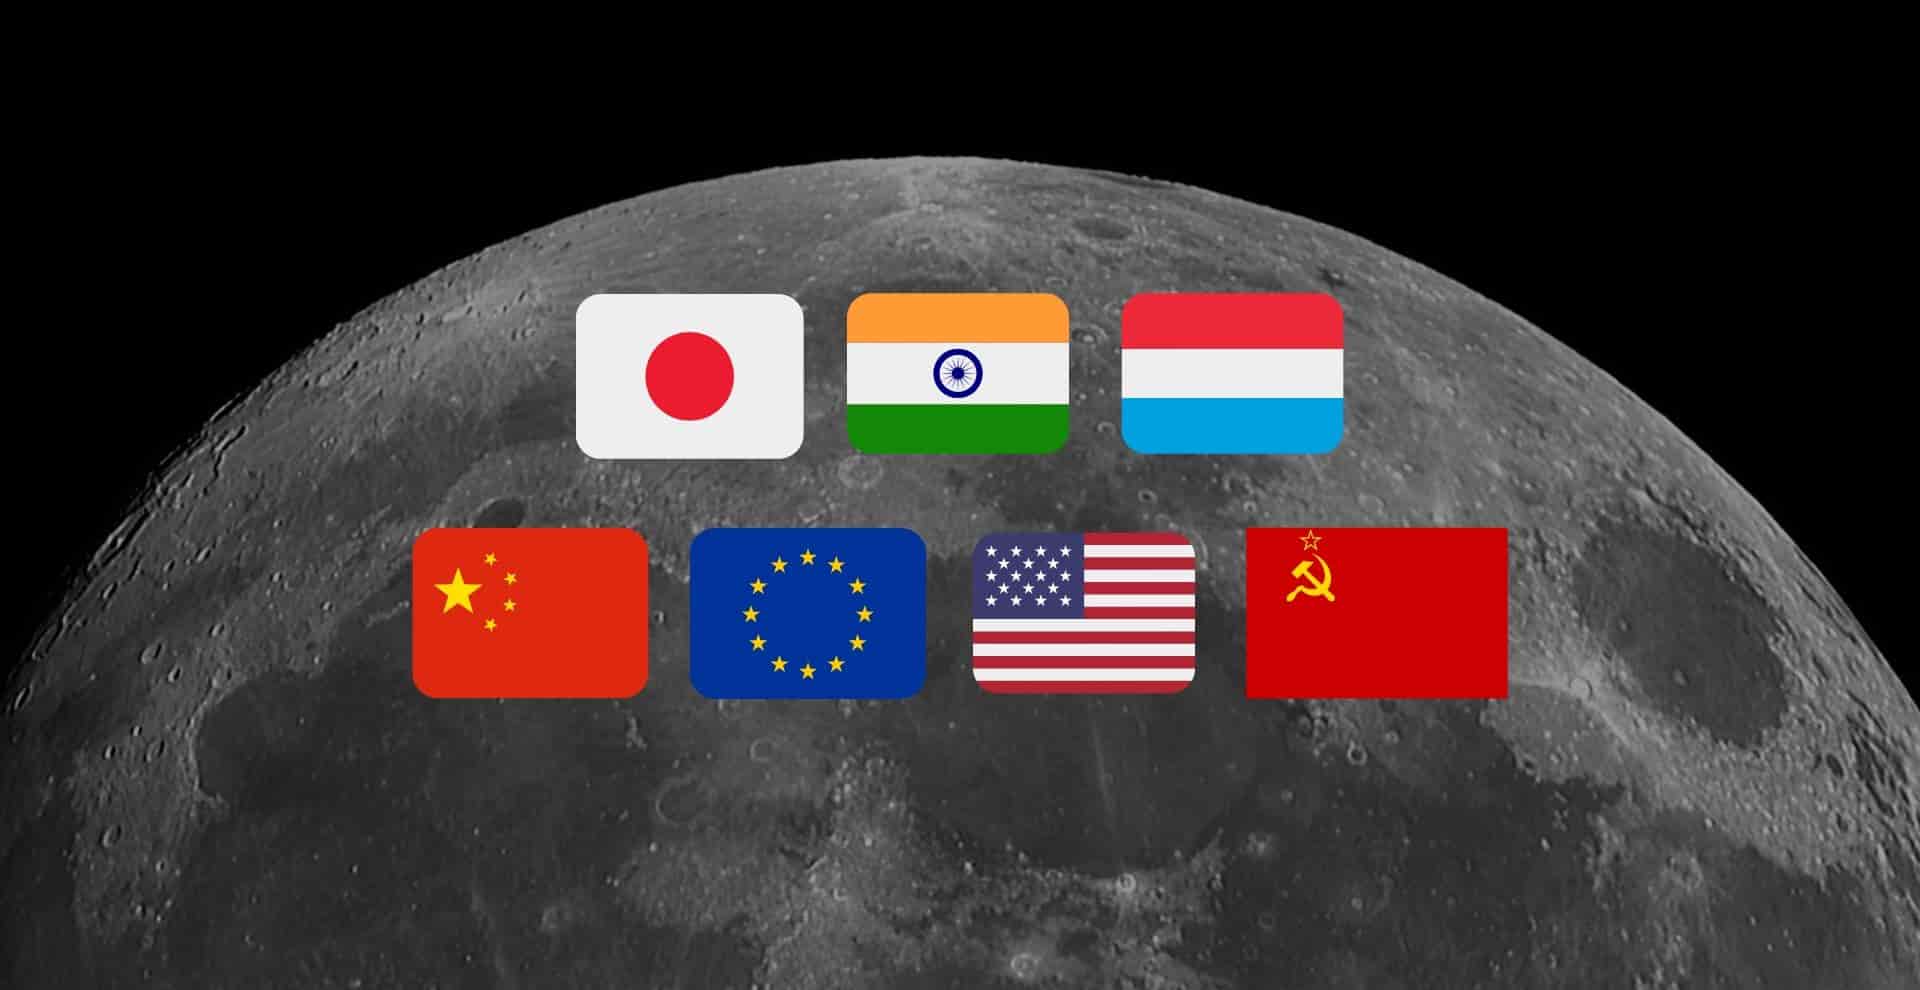 Countries that have been to the moon